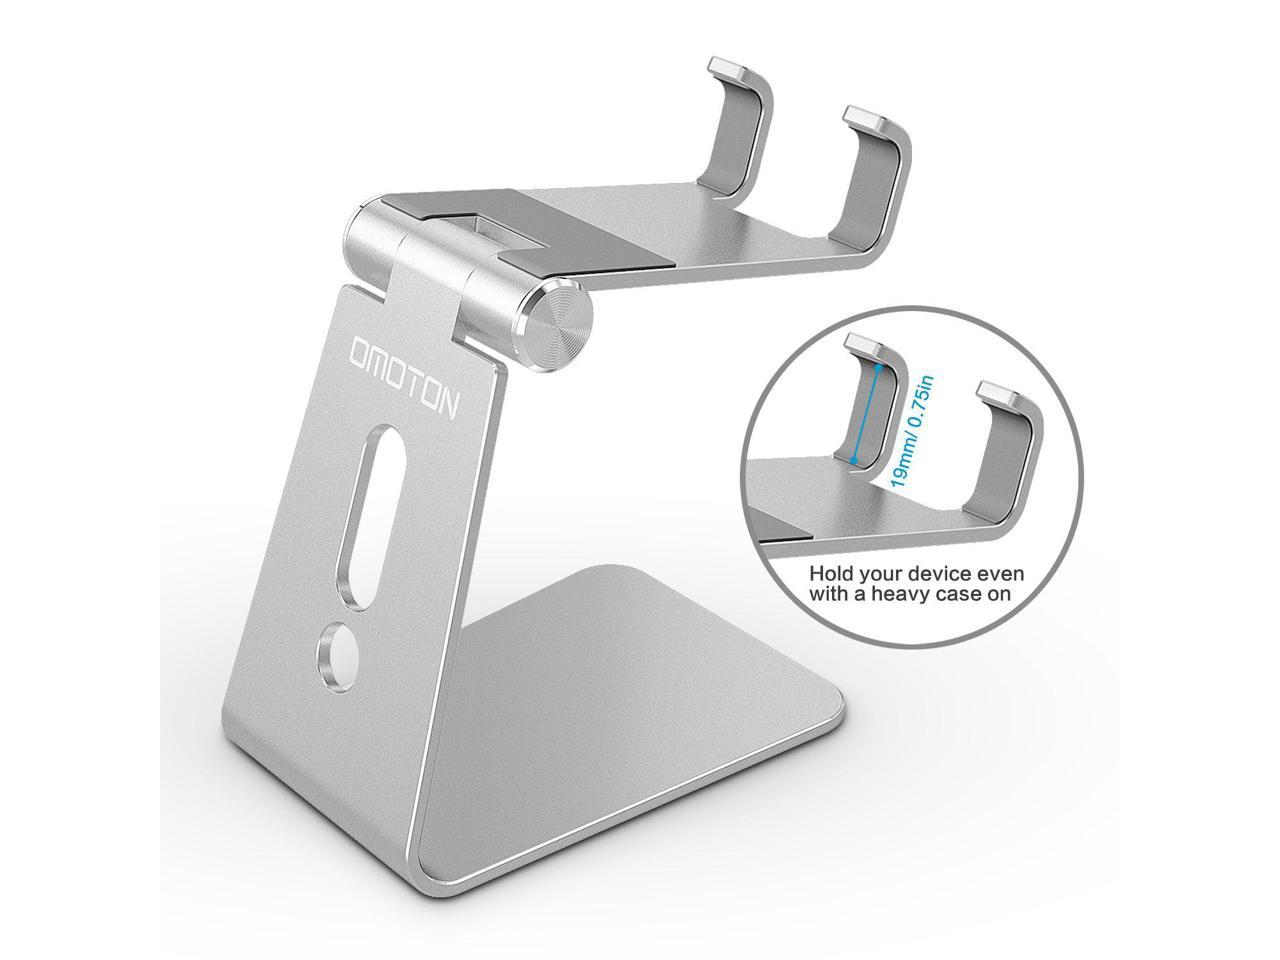 Adjustable Cell Phone Stand OMOTON Aluminum Desktop Cellphone Stand with Anti-Slip Base and Convenient Charging Port Silver Fits All Smart Phones